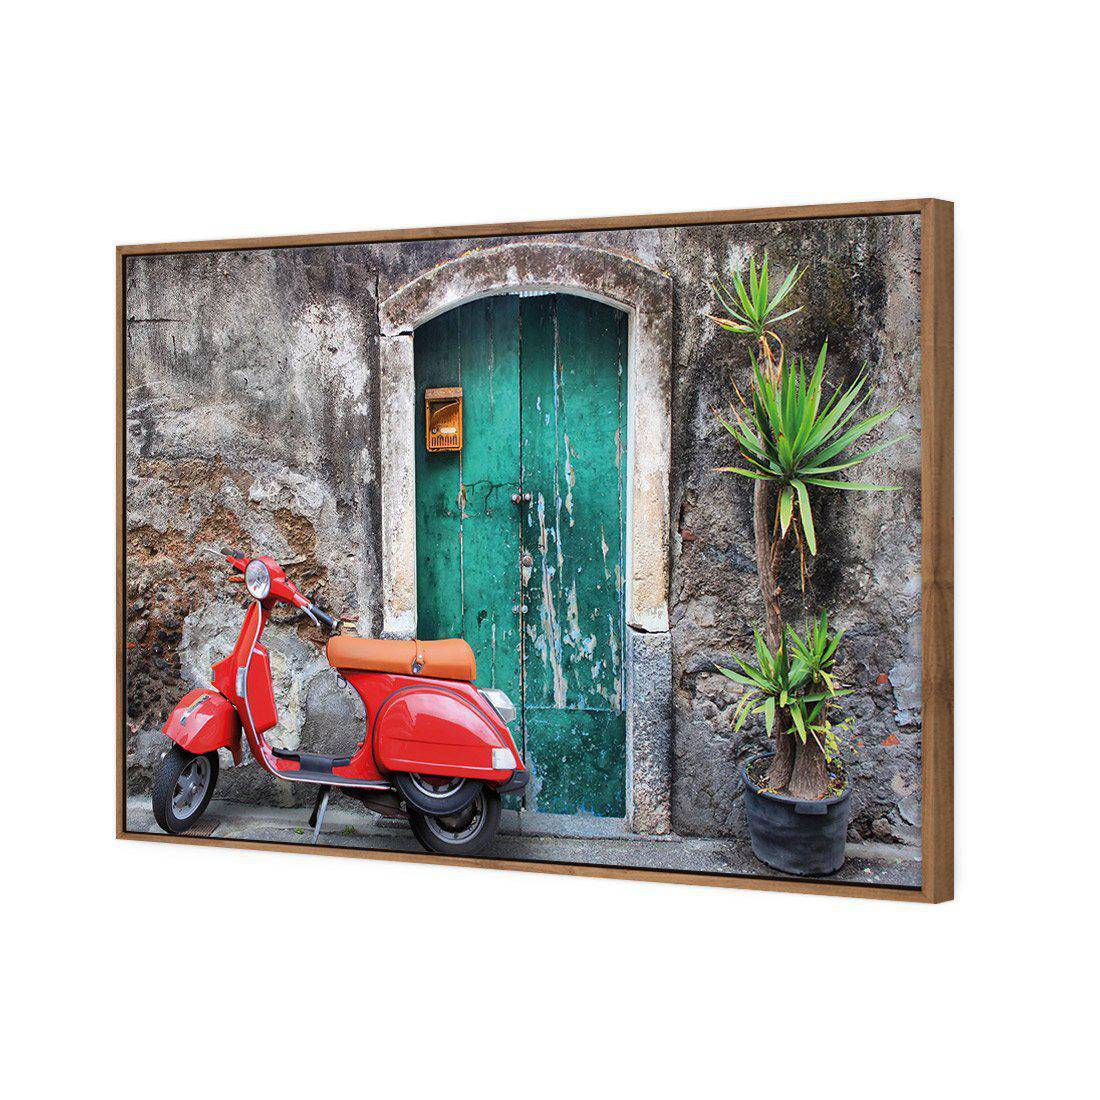 Vintage Door And Scooter Canvas Art-Canvas-Wall Art Designs-45x30cm-Canvas - Natural Frame-Wall Art Designs